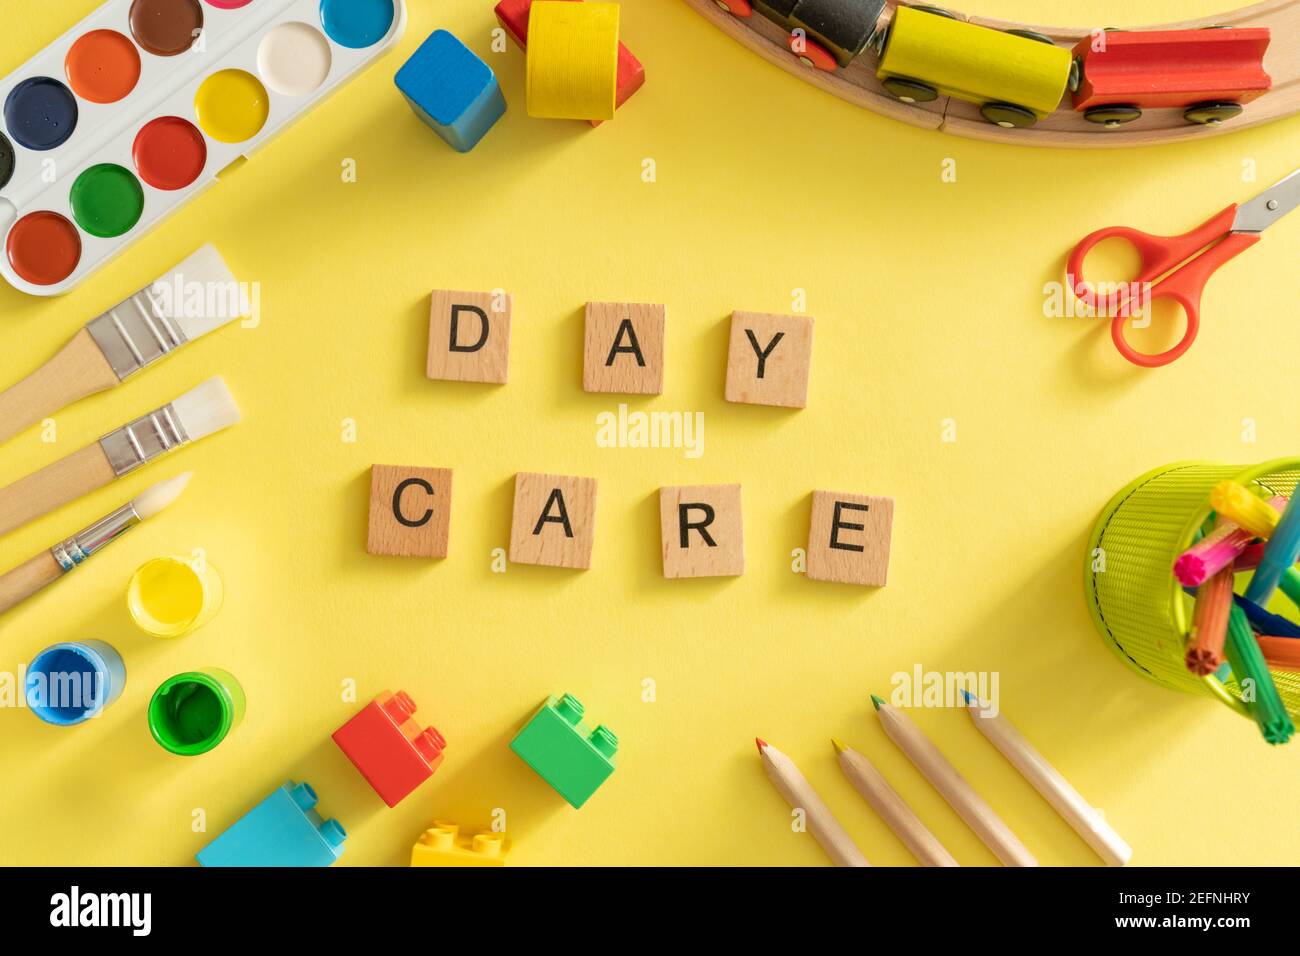 Day care concept - toy and art supply Stock Photo